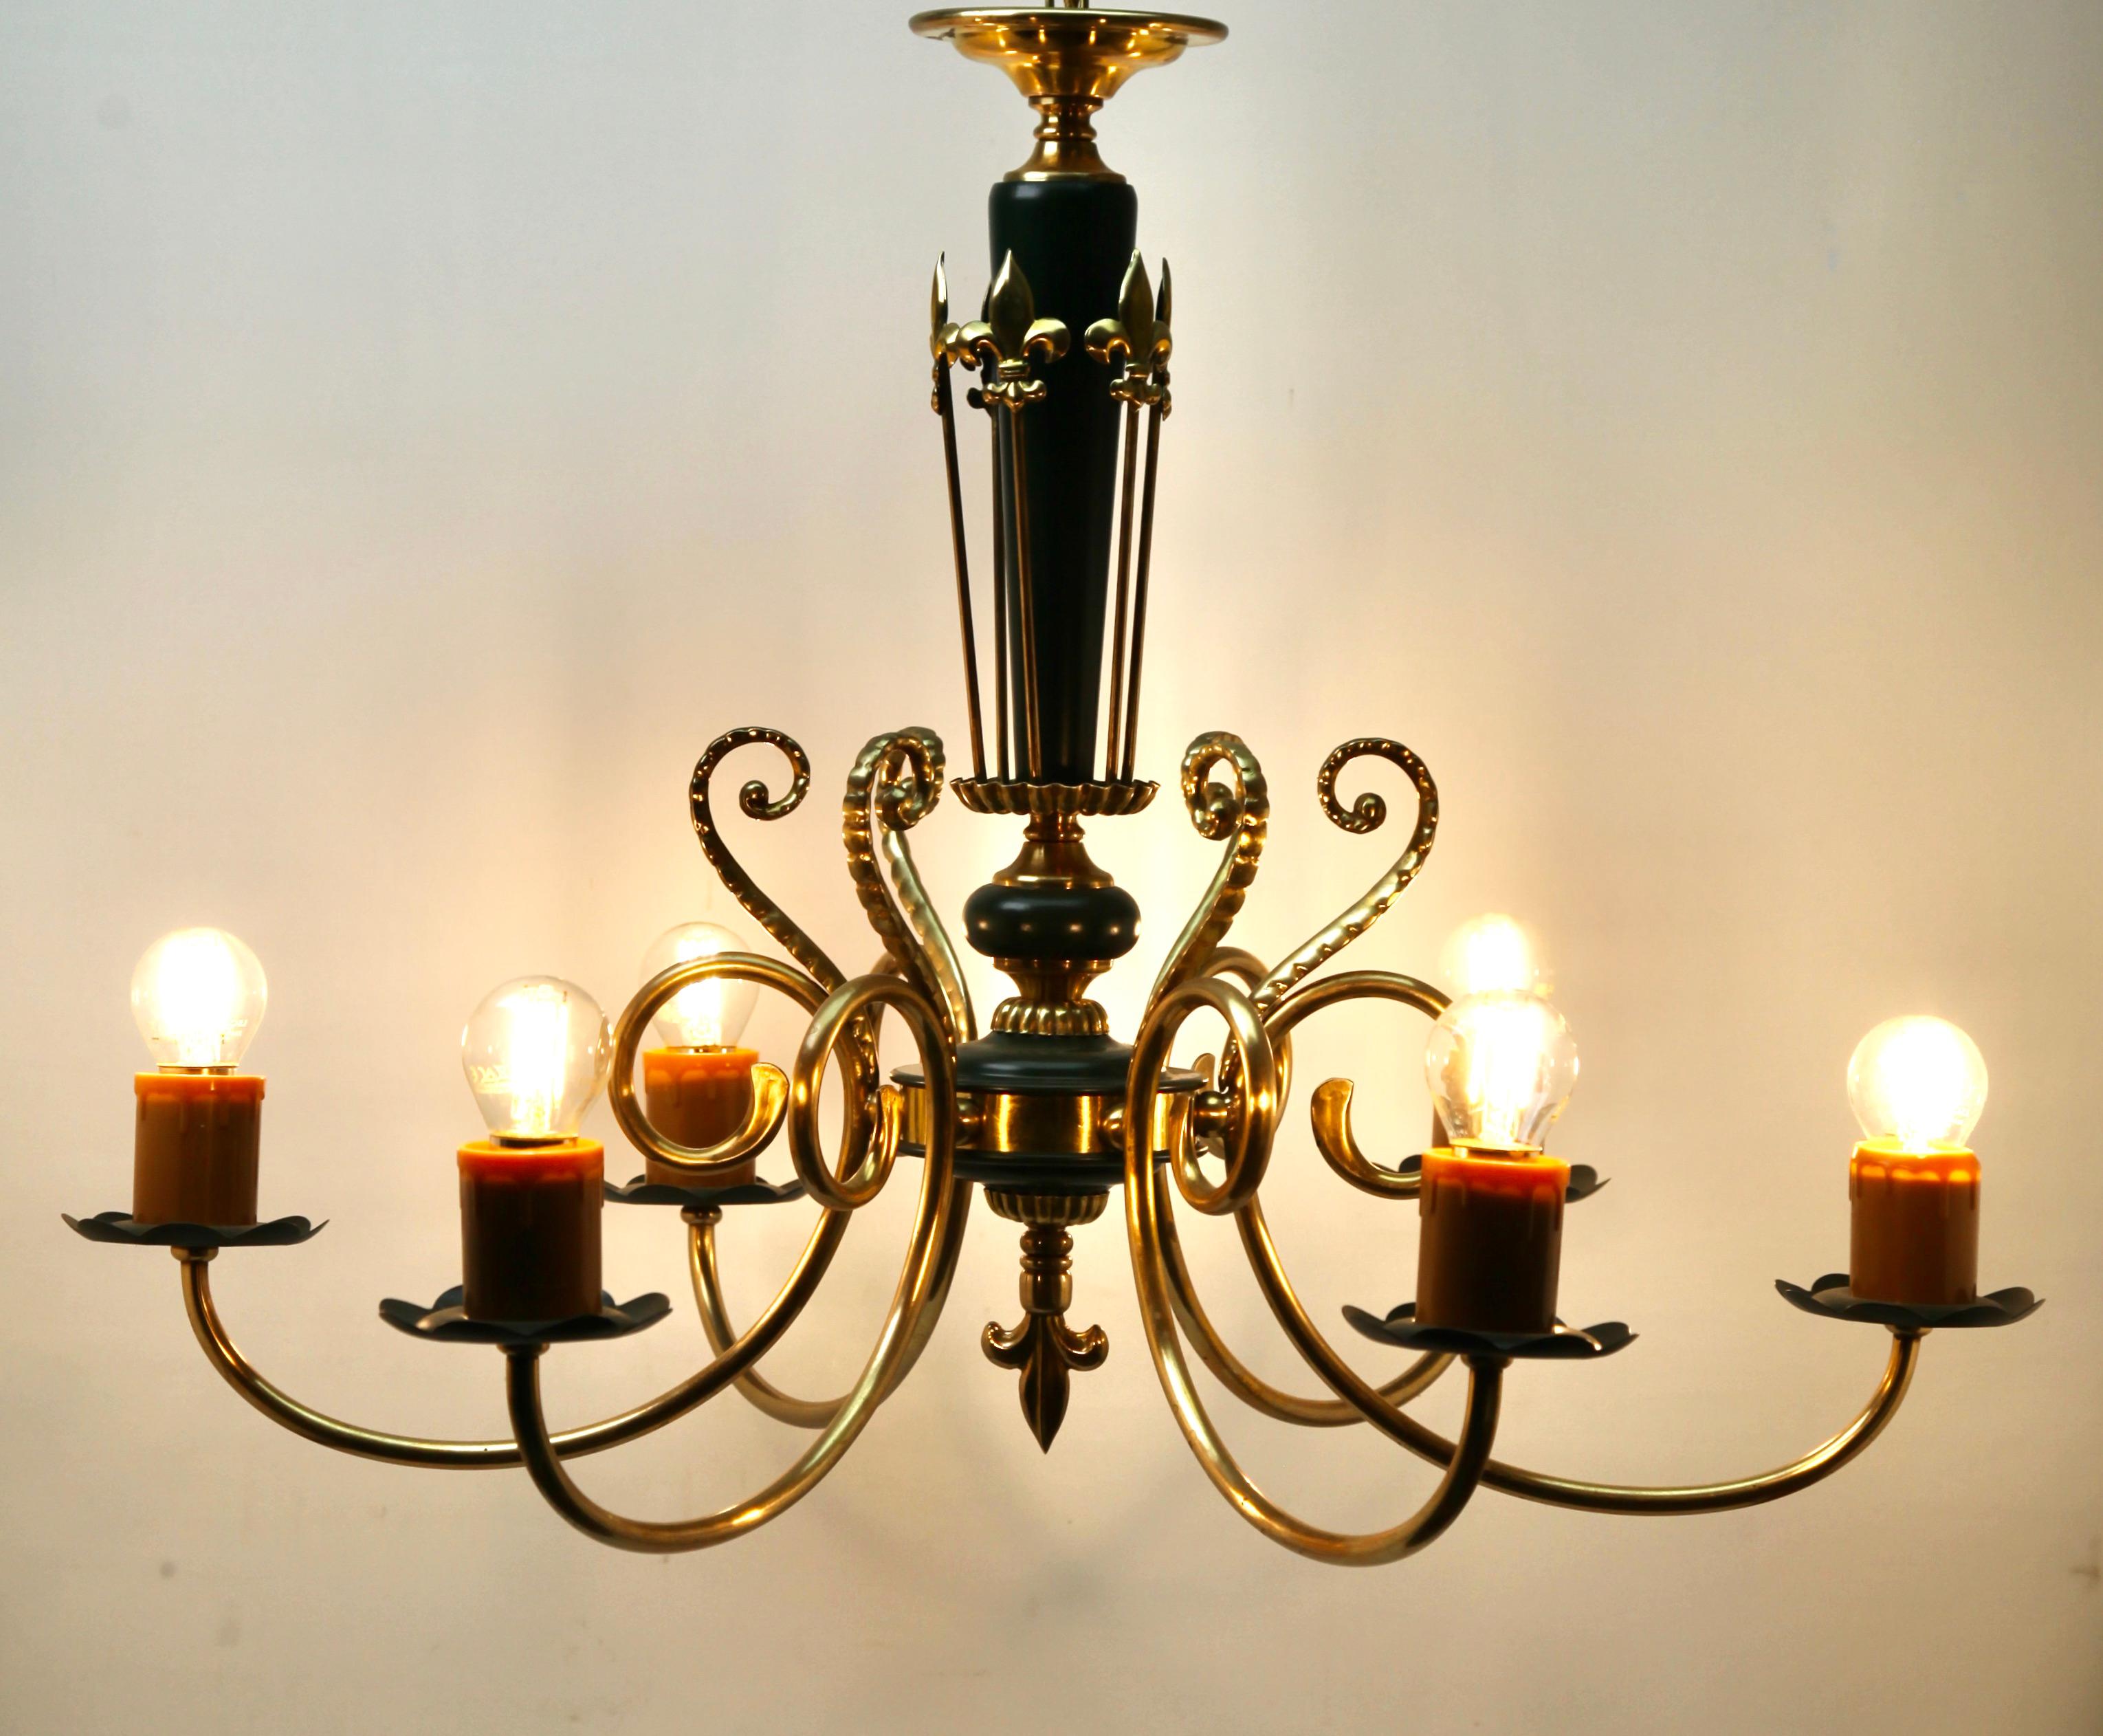 Hand-Crafted Vintage Chandelier Brass and Wood Decoratief Details Six Arms Belgium, 1950s